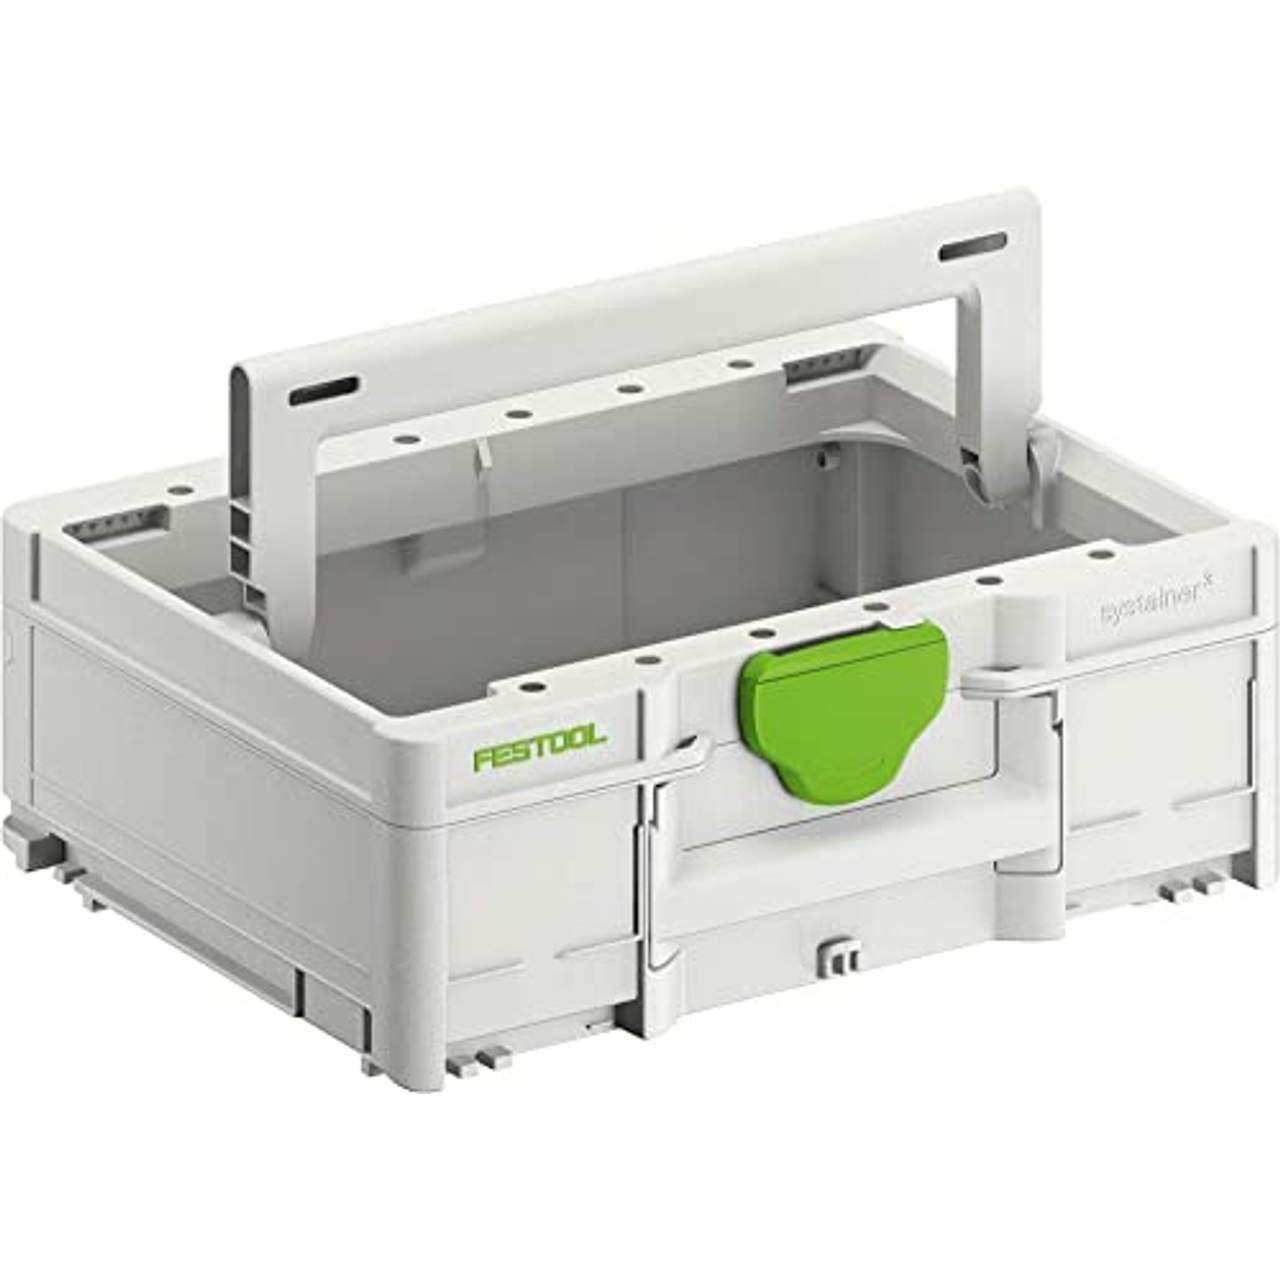 Festool 204865 Systainer³ Toolbox SYS 3 TB M 137 396 x 296 x 137 mm